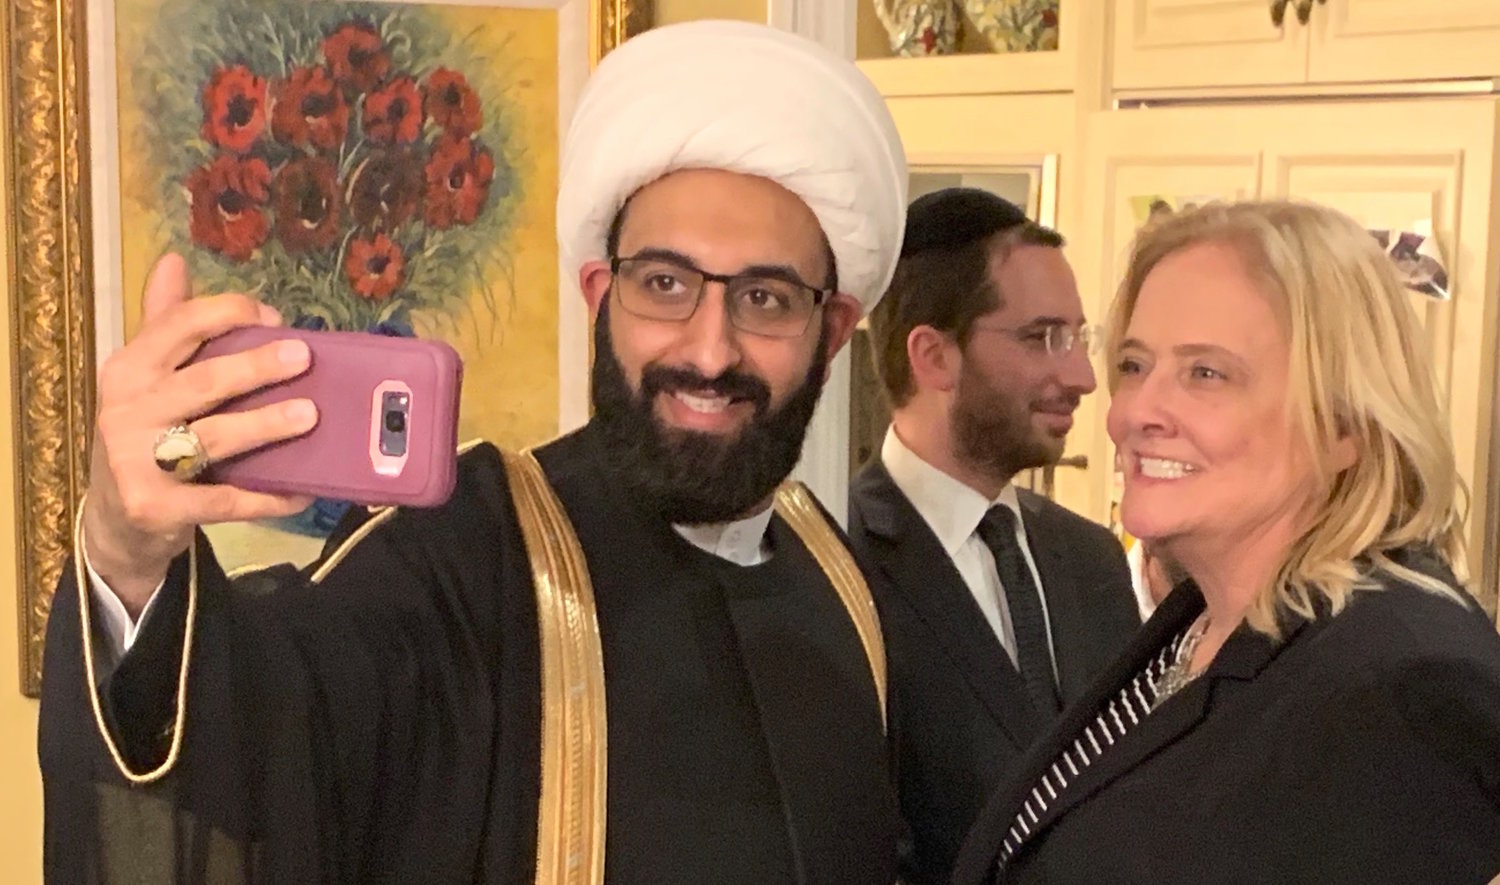 Imam Mohammad Tawhidi takes a selfie at the request of a fan, a Christian supporter of Israel who traveled to Woodmere to meet Tawhidi at last Wednesday evening’s parlor meeting.